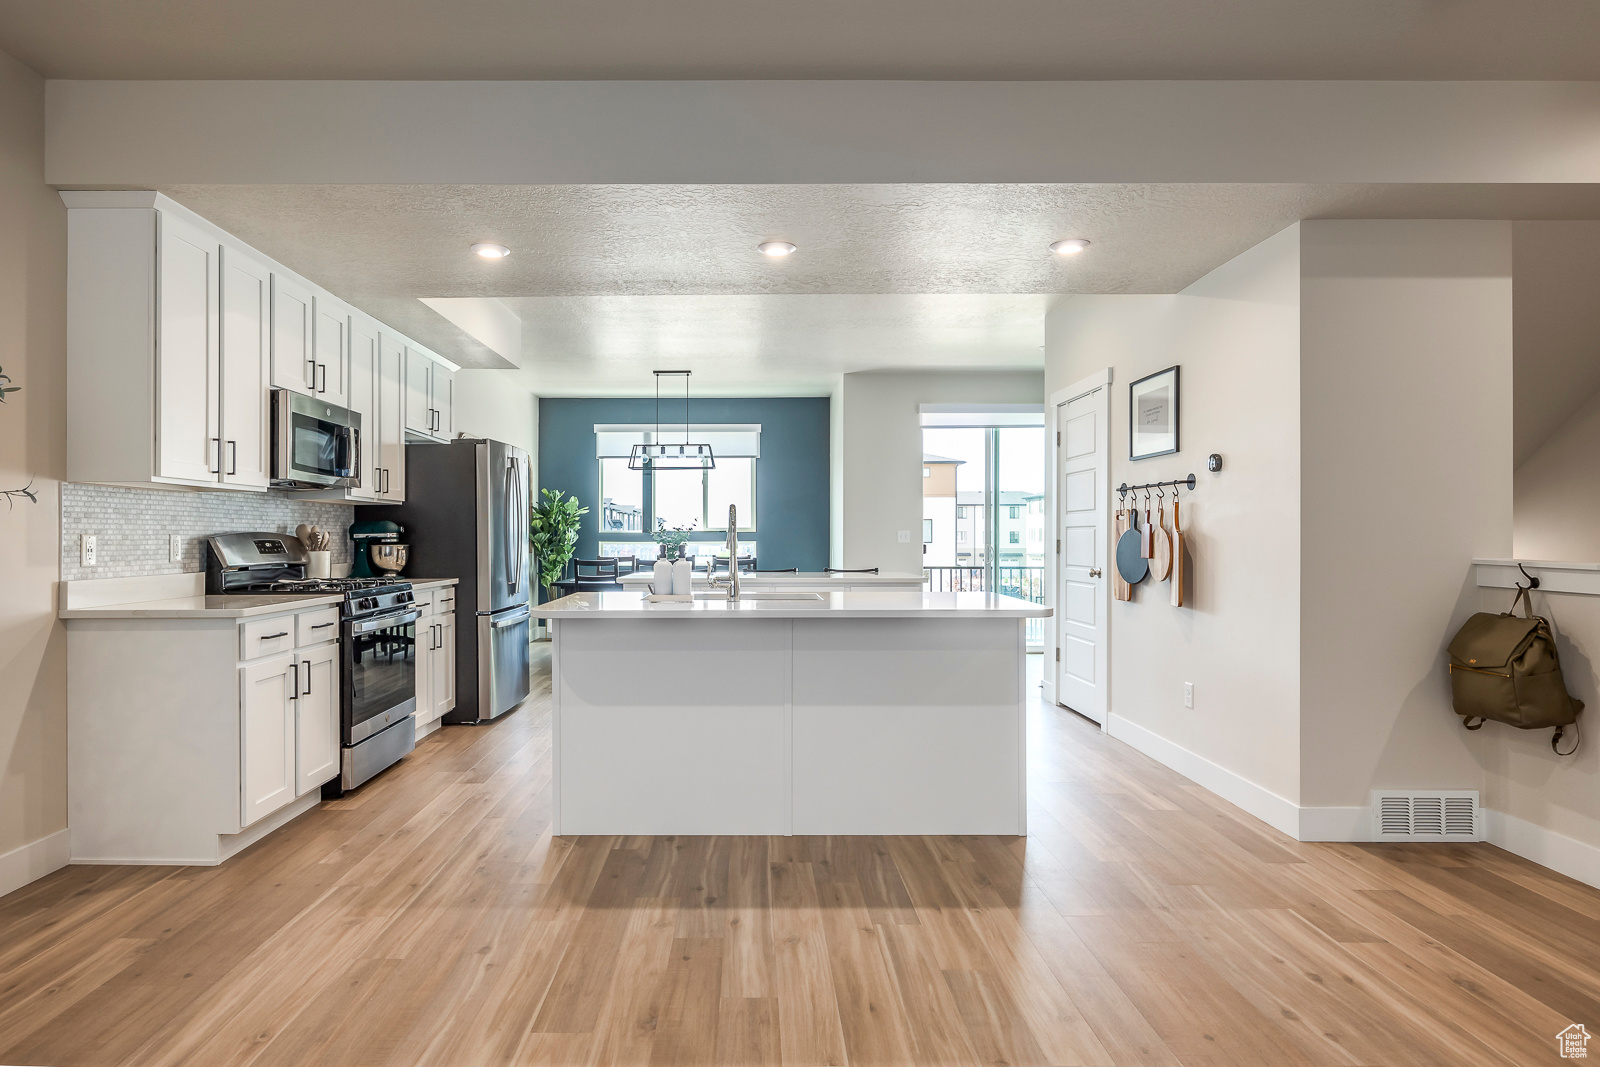 Kitchen featuring white cabinets, light wood-type flooring, and stainless steel appliances